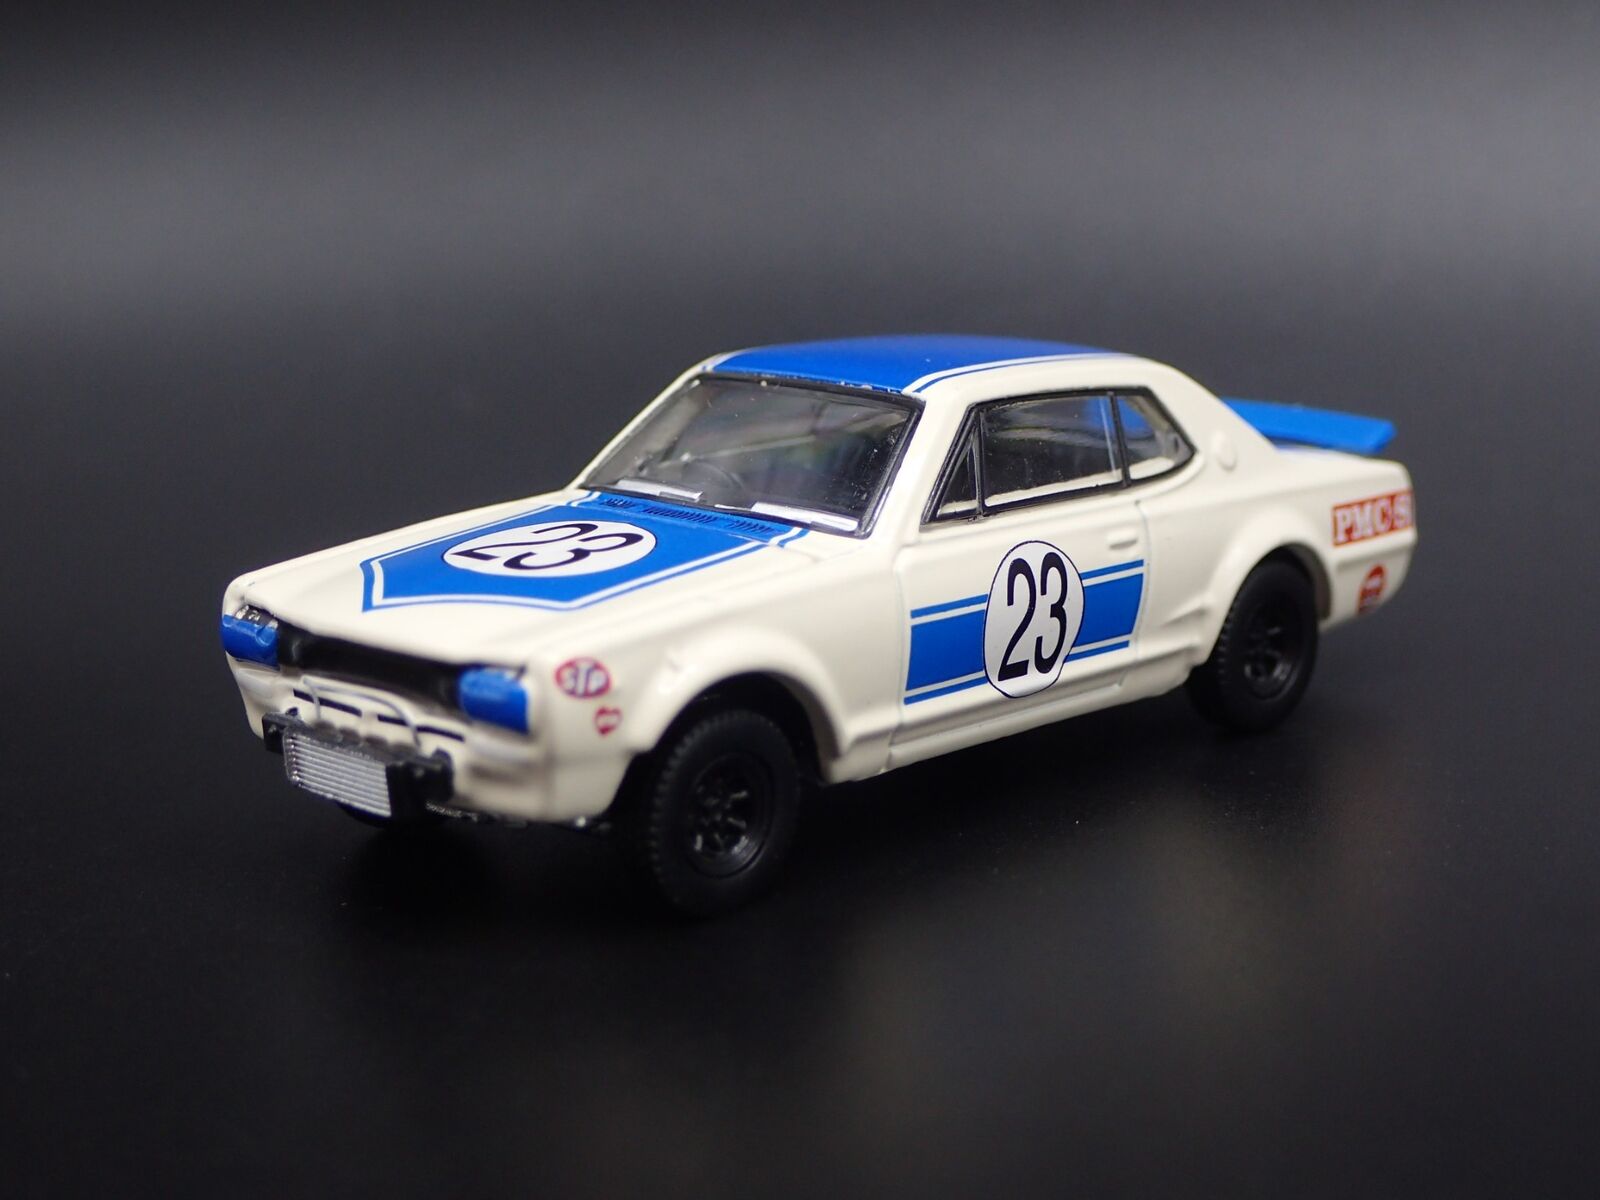 1971 71 NISSAN SKYLINE GTR PMCS 1:64 SCALE COLLECTIBLE DIORAMA DIECAST MODEL CAR